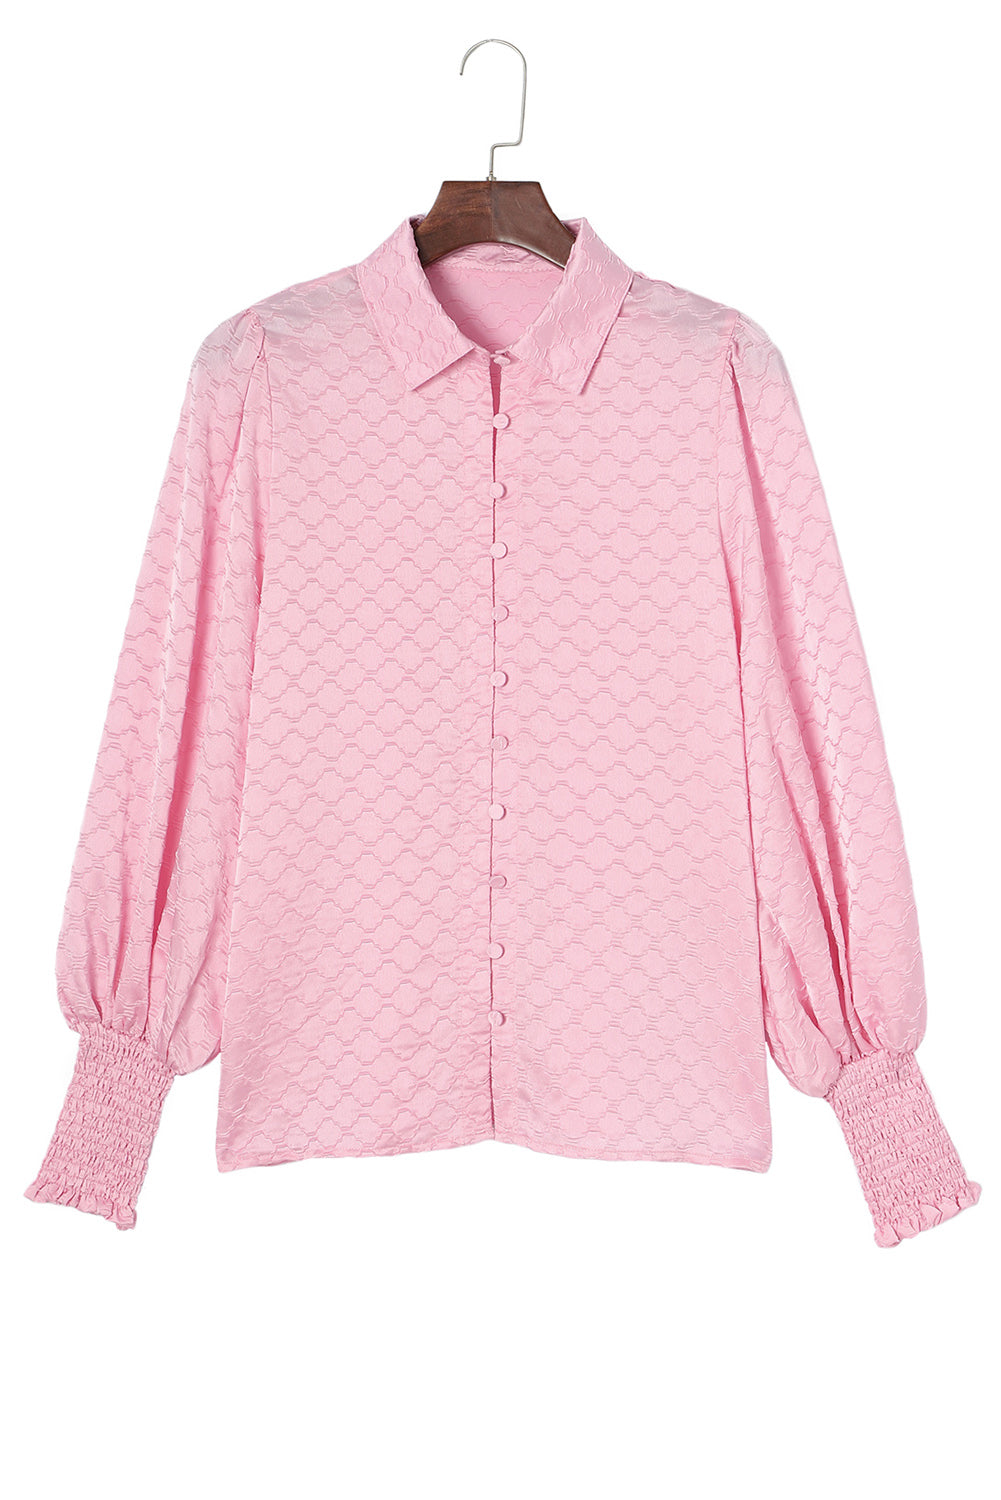 LC2553464-10-S, LC2553464-10-M, LC2553464-10-L, LC2553464-10-XL, LC2553464-10-2XL, Pink blouse